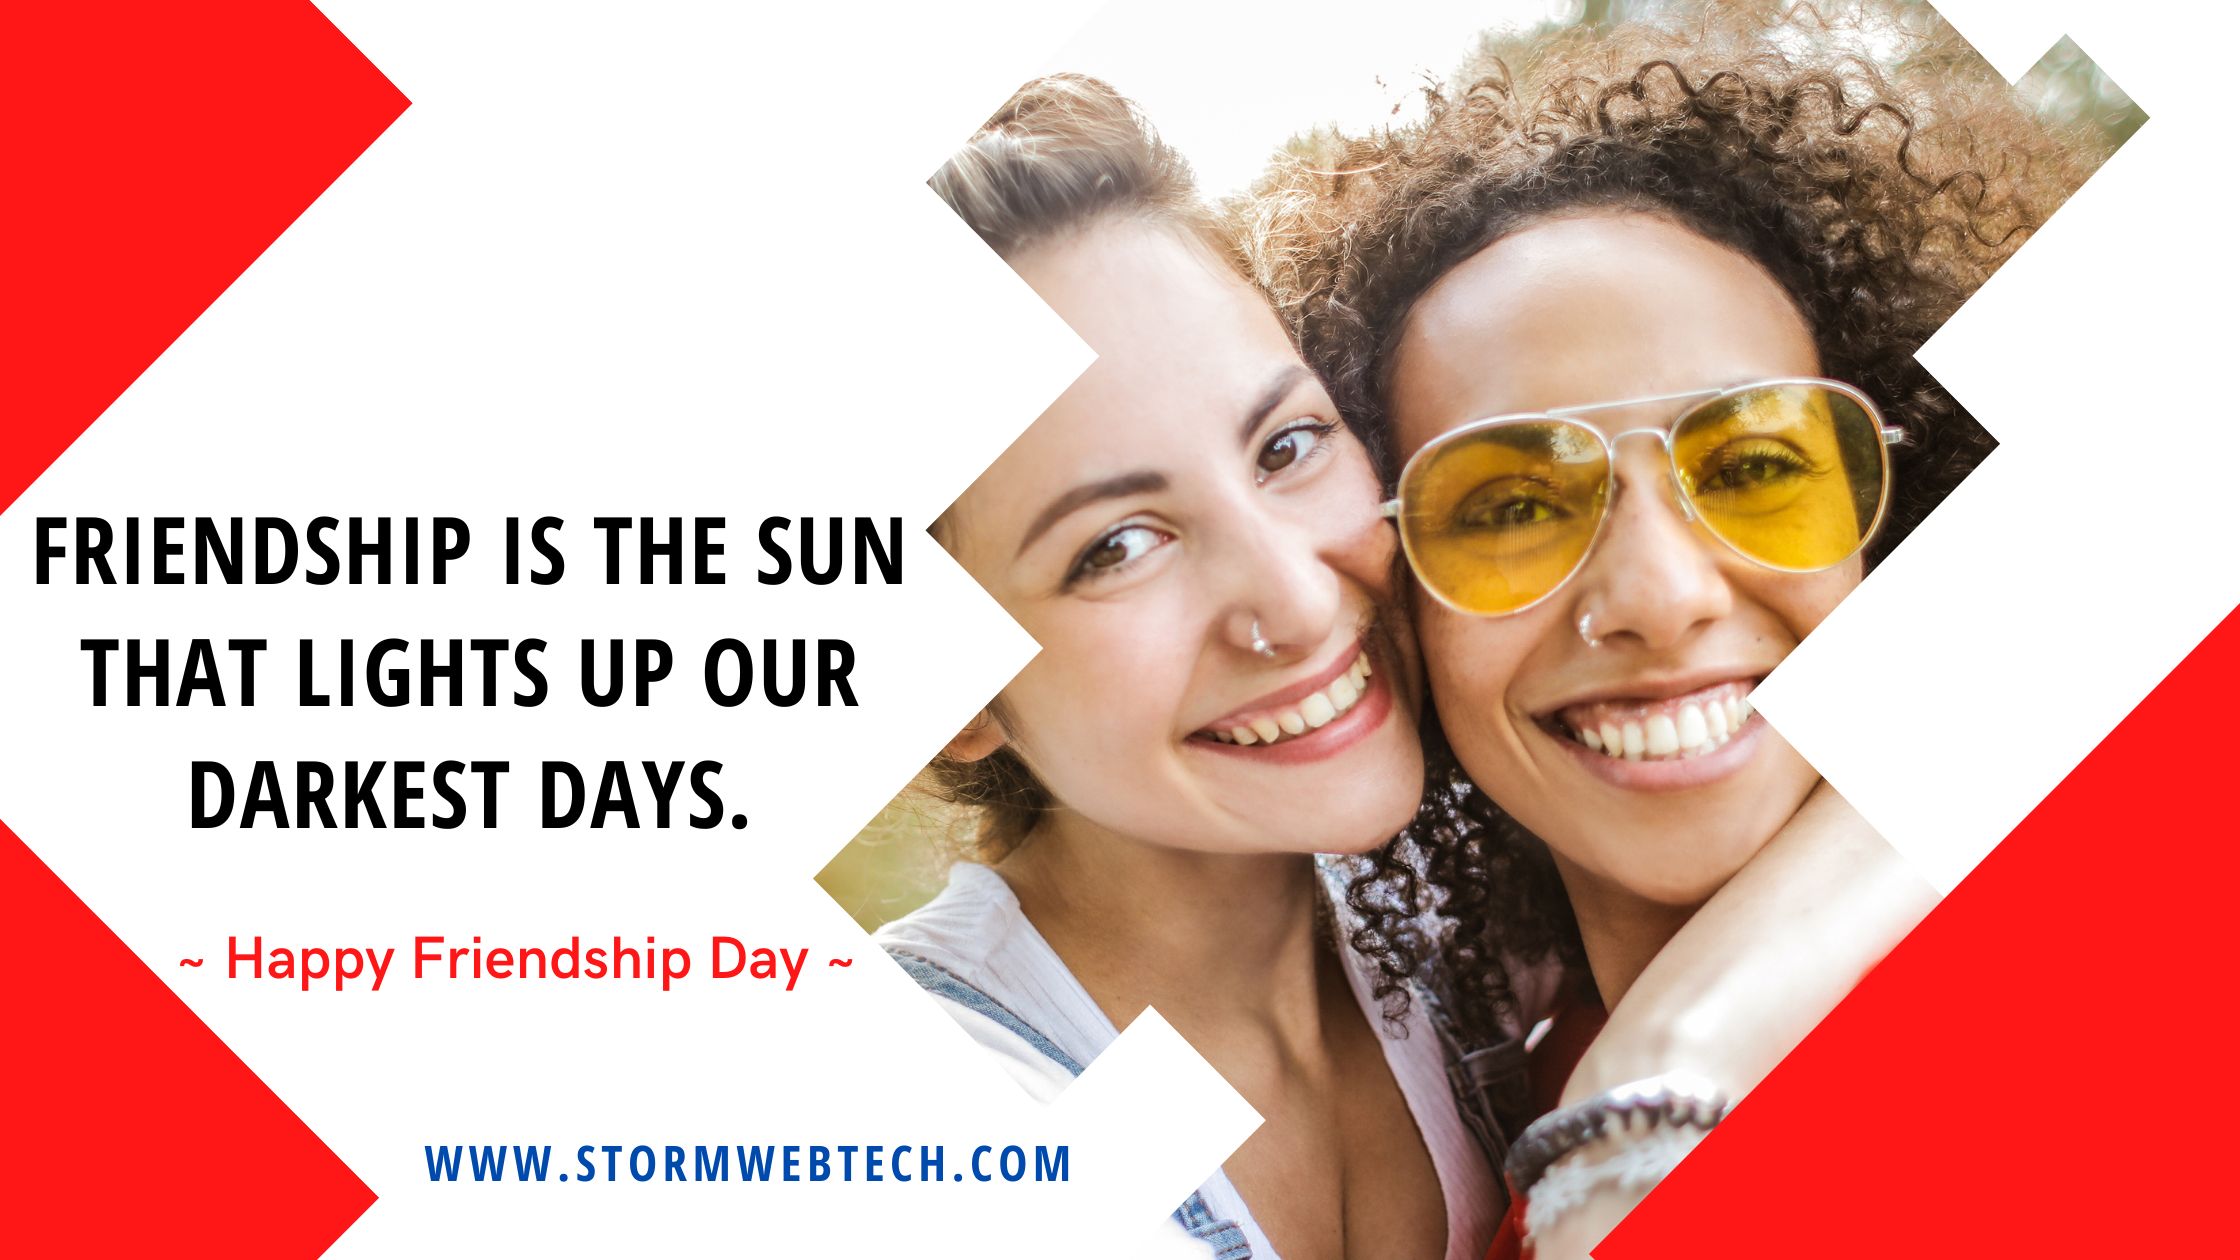 Happy Friendship Day Quotes on Friendship Day, friendship day quotes in english, friendship day quotes, quotes on friendship day